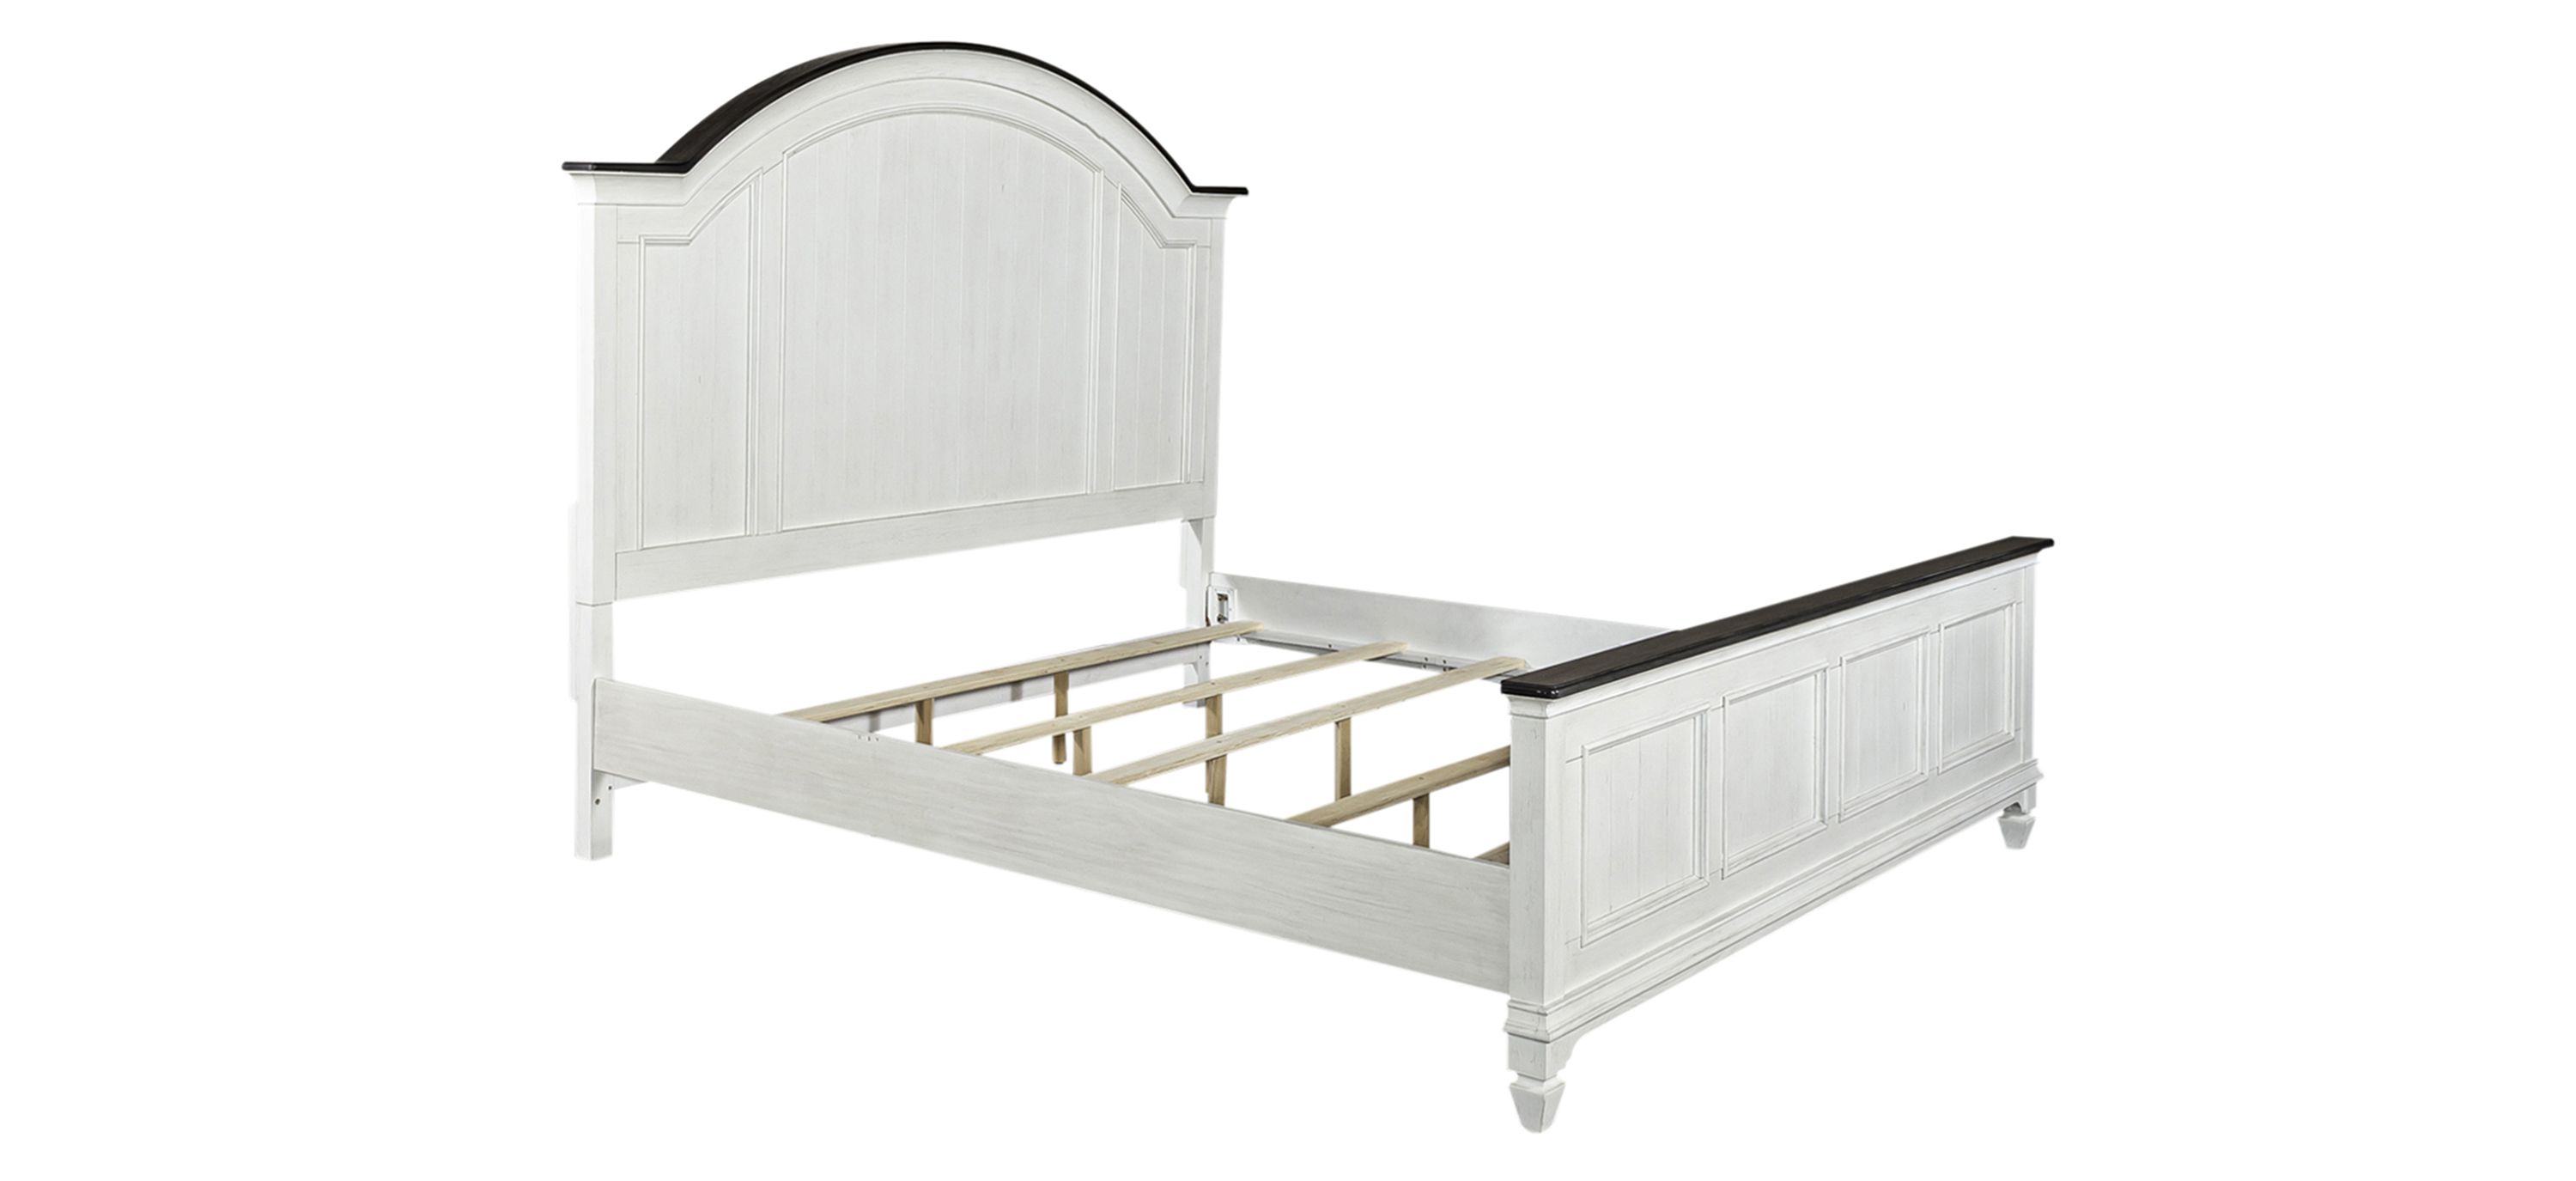 Shelby Arched Panel Bed